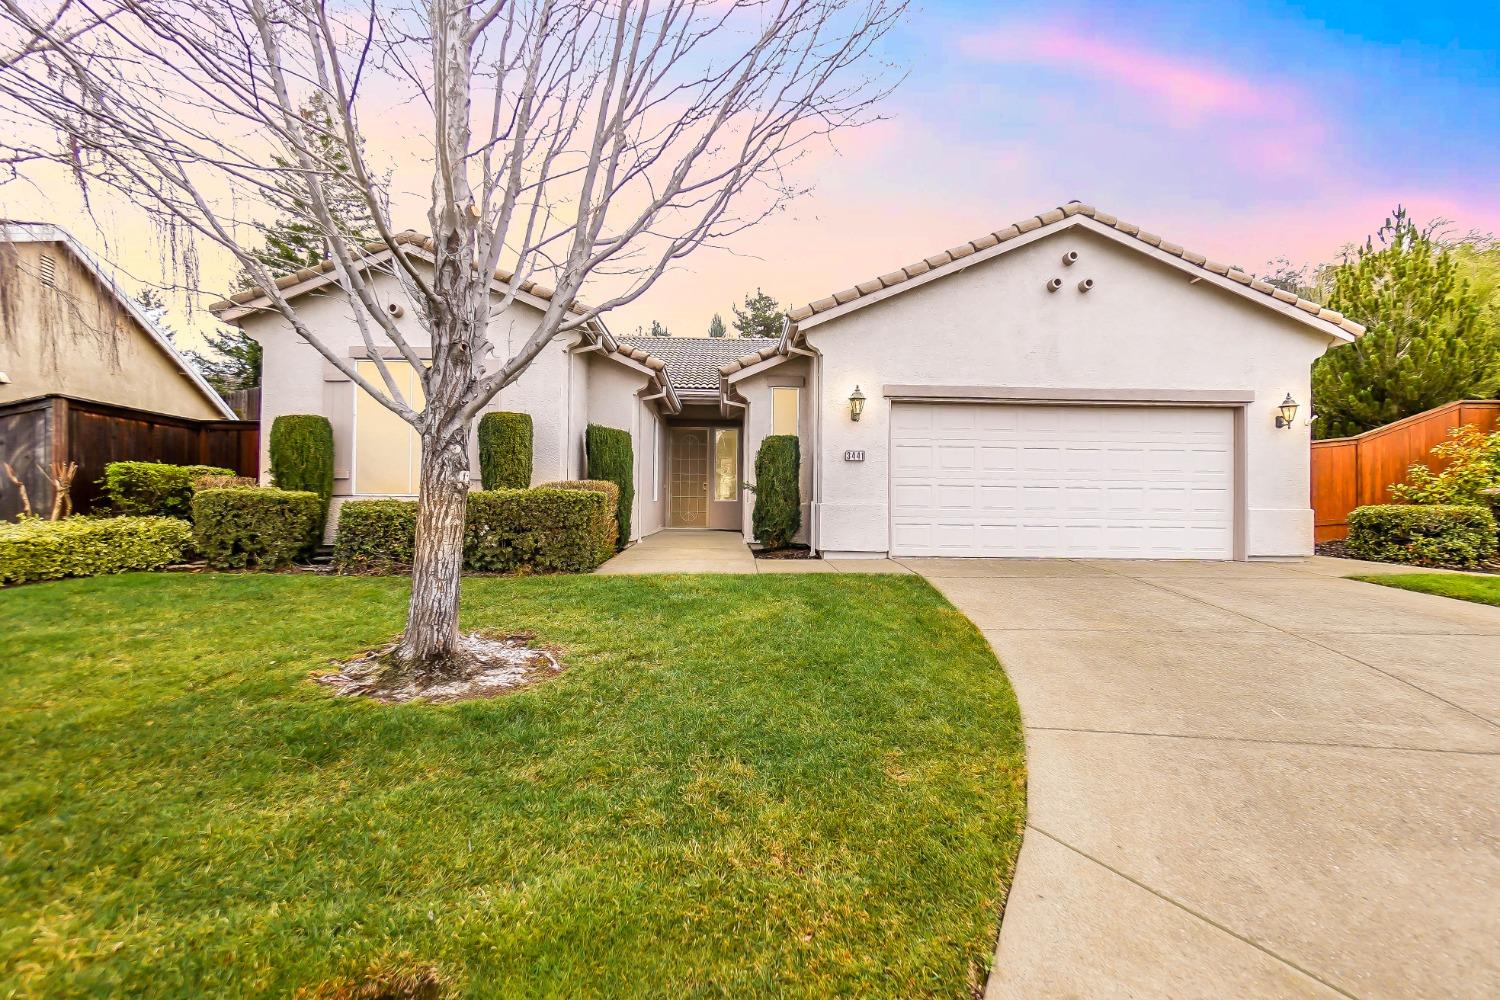 Photo of 3441 Vincent Ct in Rocklin, CA